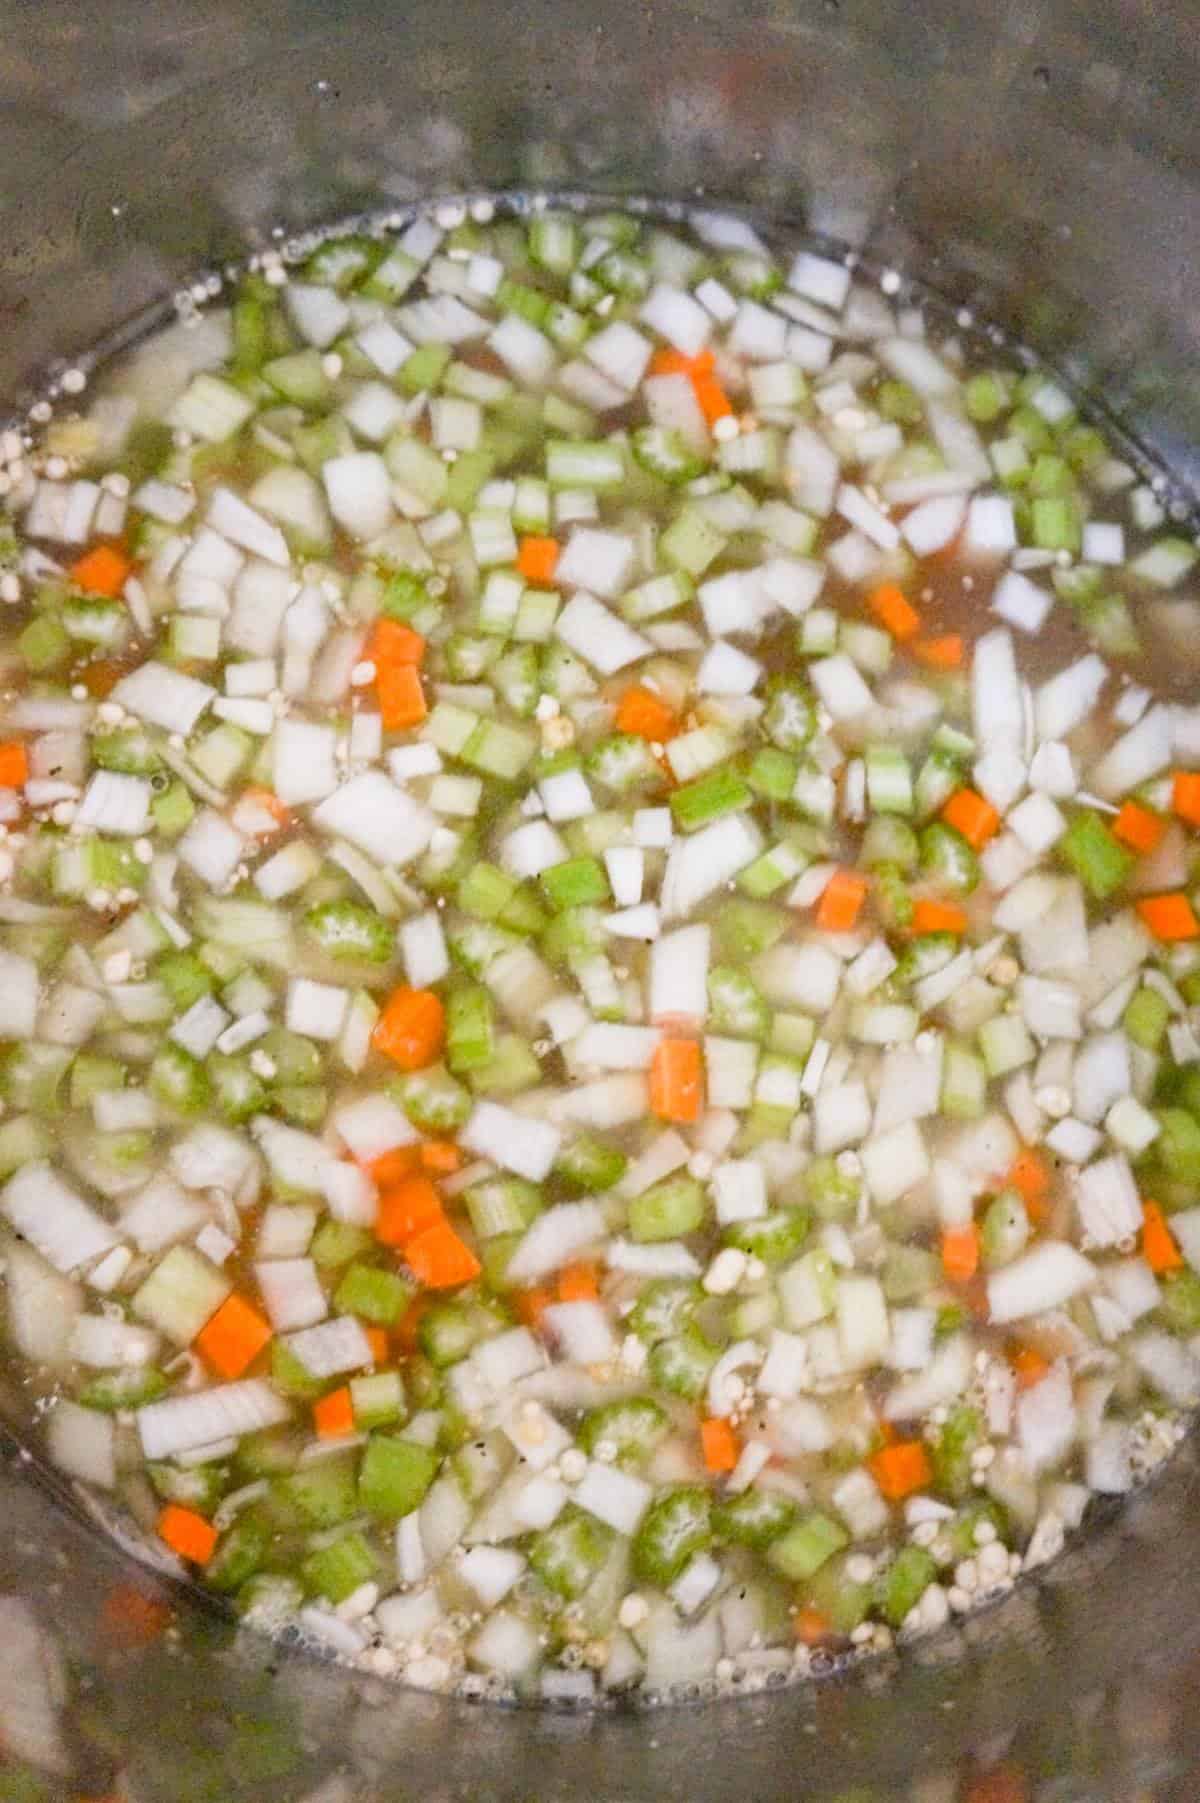 diced vegetables and broth in an Instant Pot